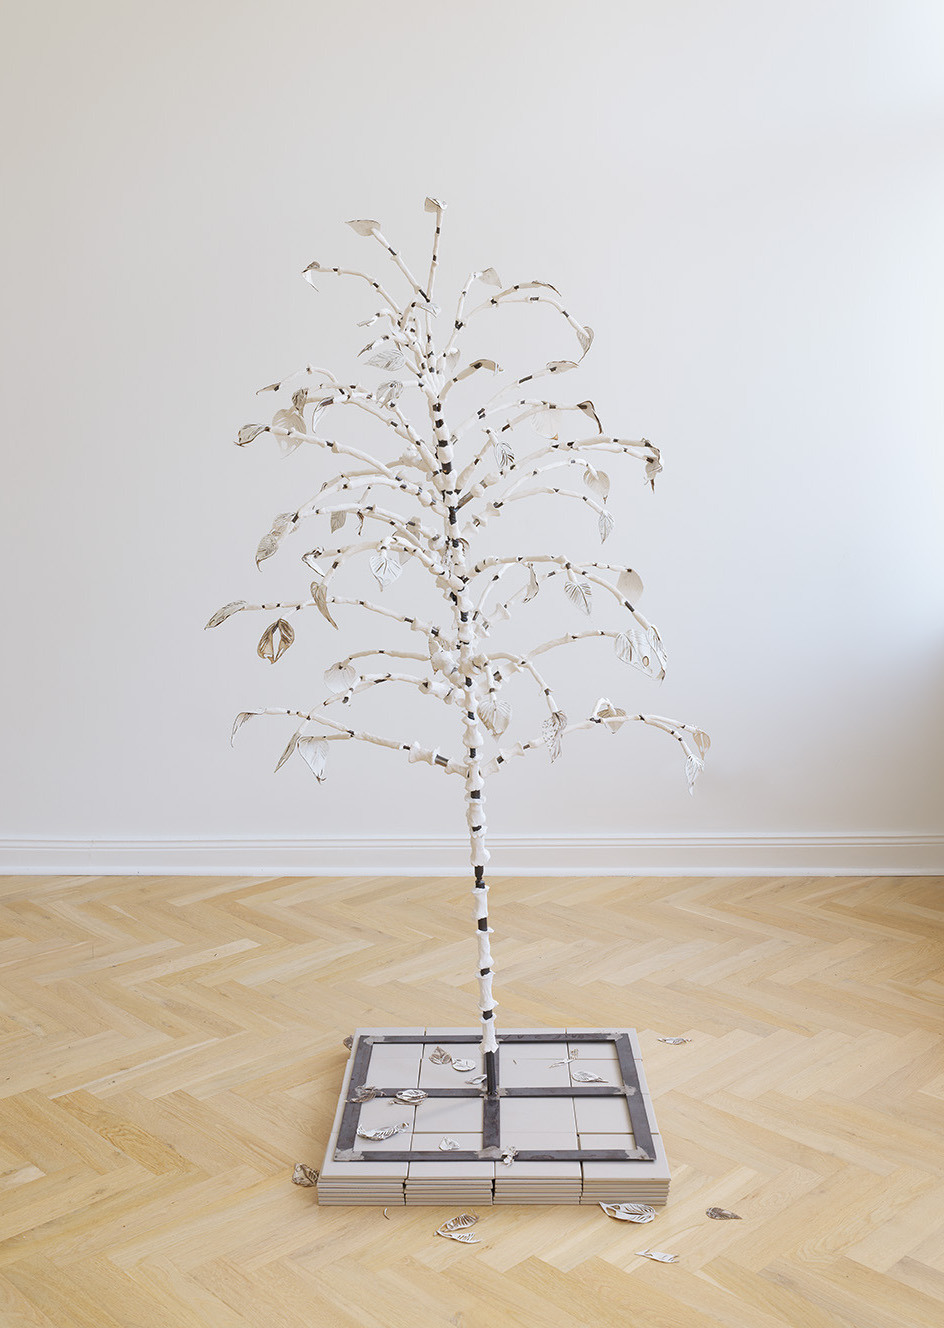 JosÃ© Montealegre: PÃ¡gina 0057 (What used to be, and still in a way is, M. Reus (Palo de MÃ¡scaras)), 2019-2023. Metal, air-dry clay, laser cut canvas, steel base, tiles. 175 x 105 x 85 cm (approximate dimensions, vary slightly)